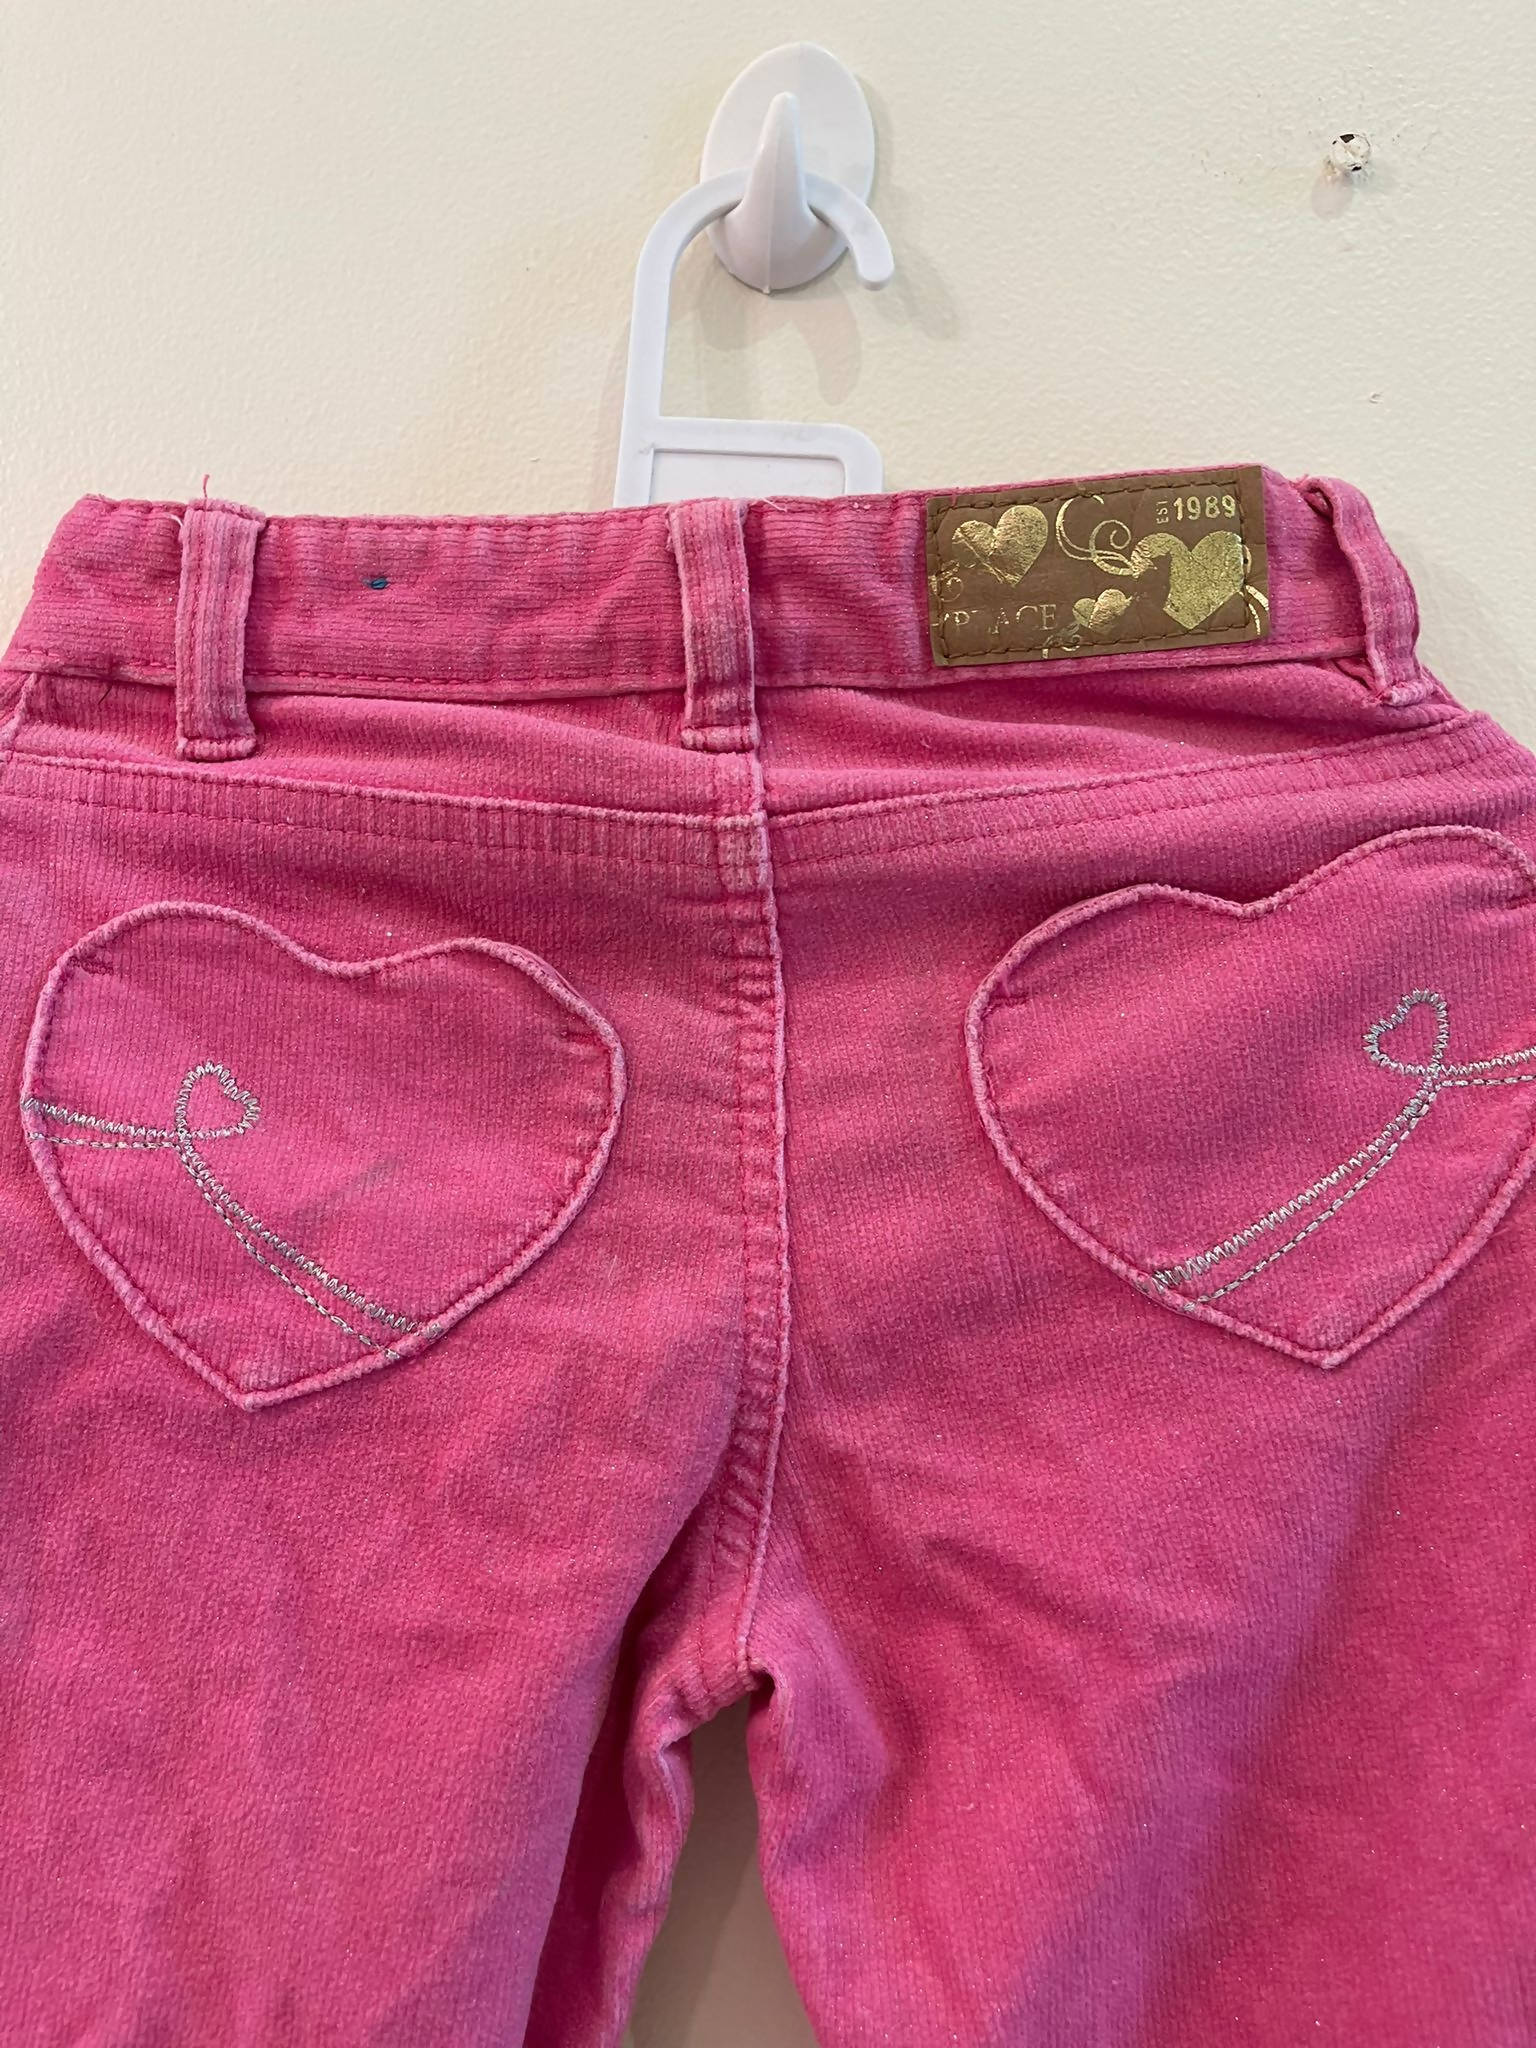 The Children’s Place | Girls Bottoms | 3T Pink jeans | New without Tags